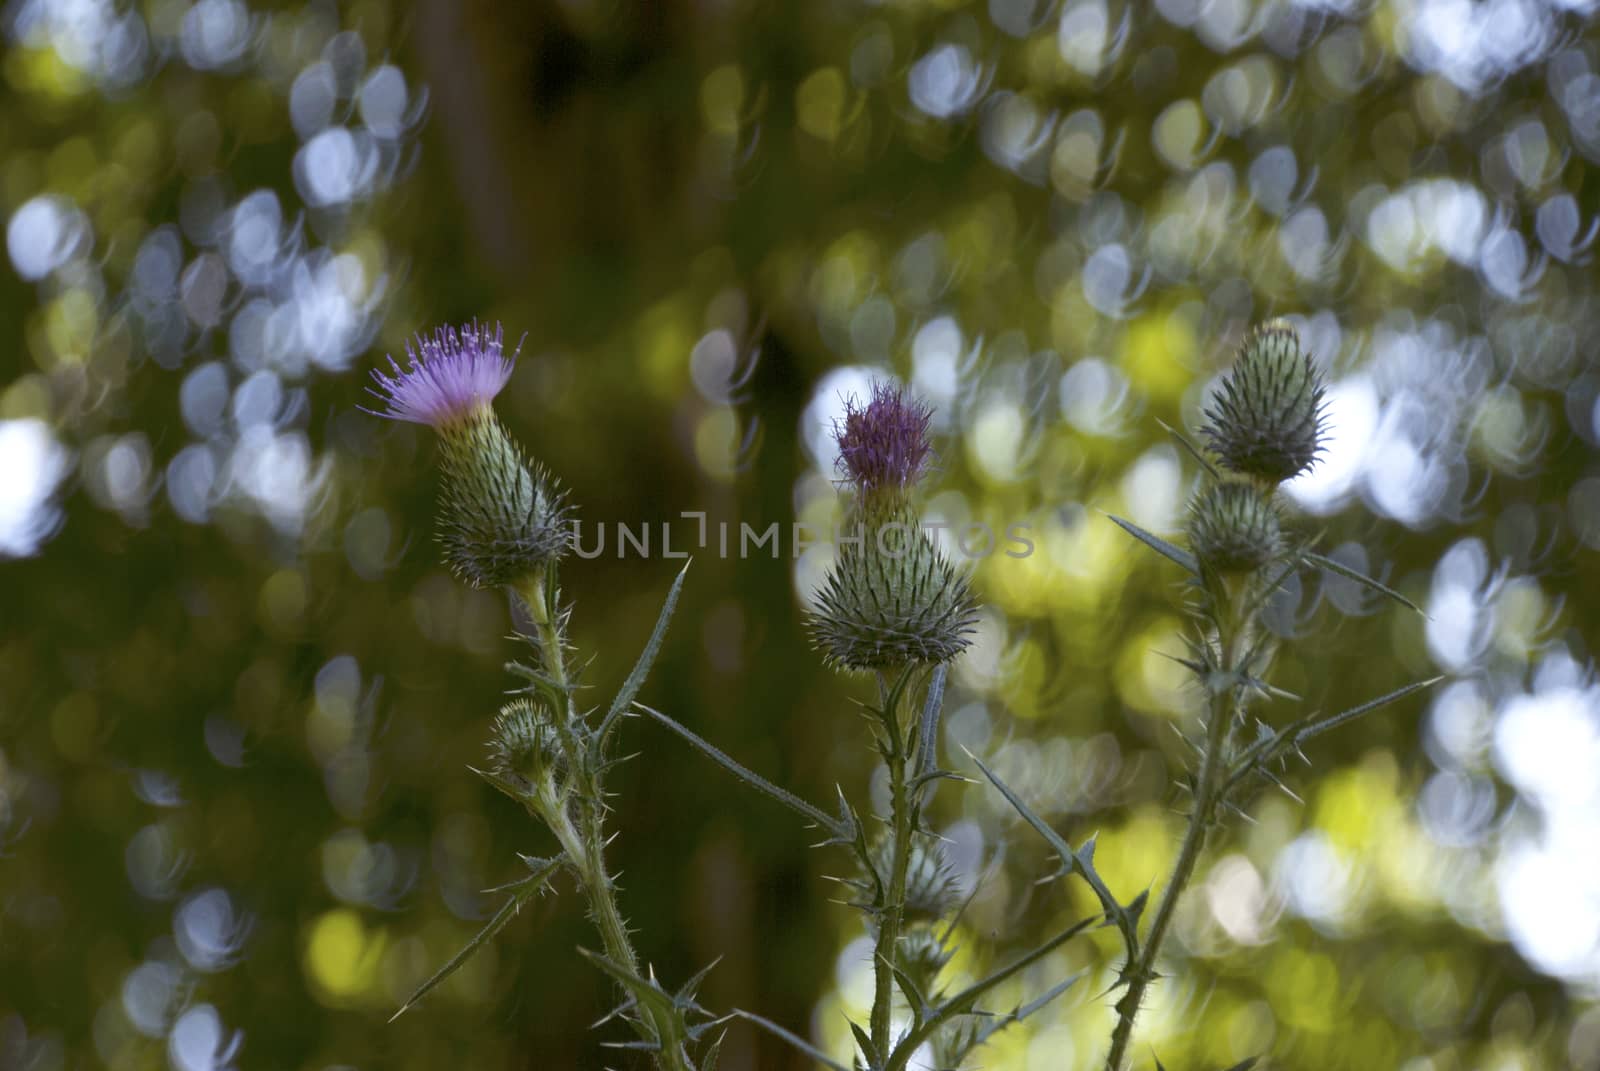 Used in the field of herbal medicine Thistle flower, symbol of Scotland